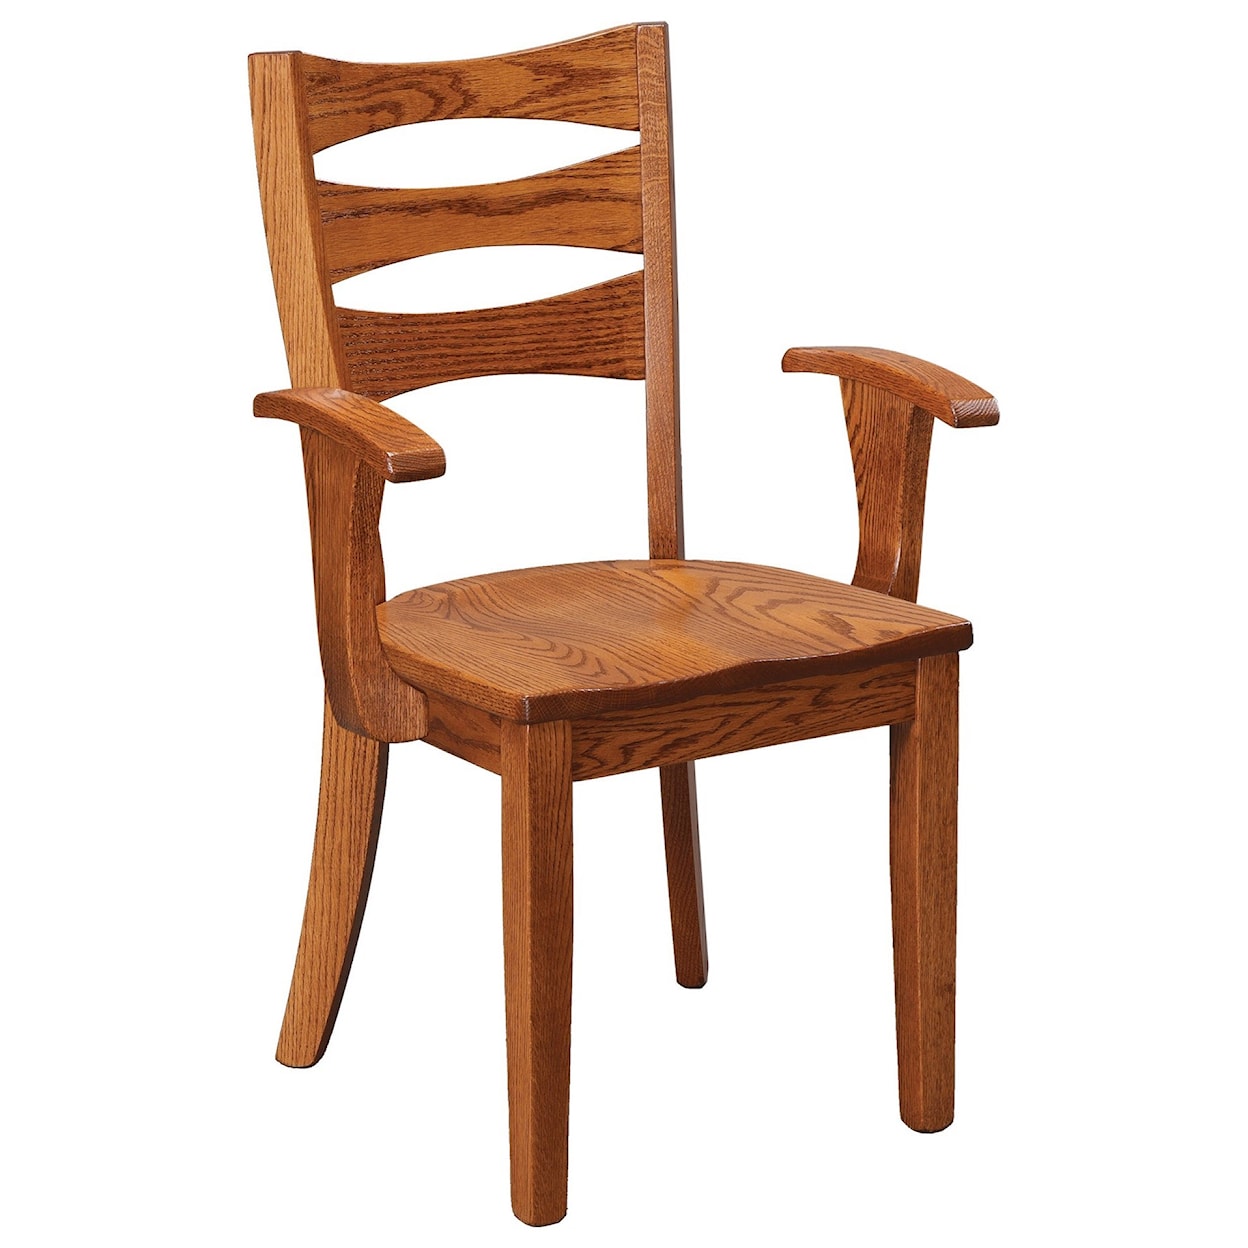 Daniels Amish Chairs and Barstools Sierra Arm Chair